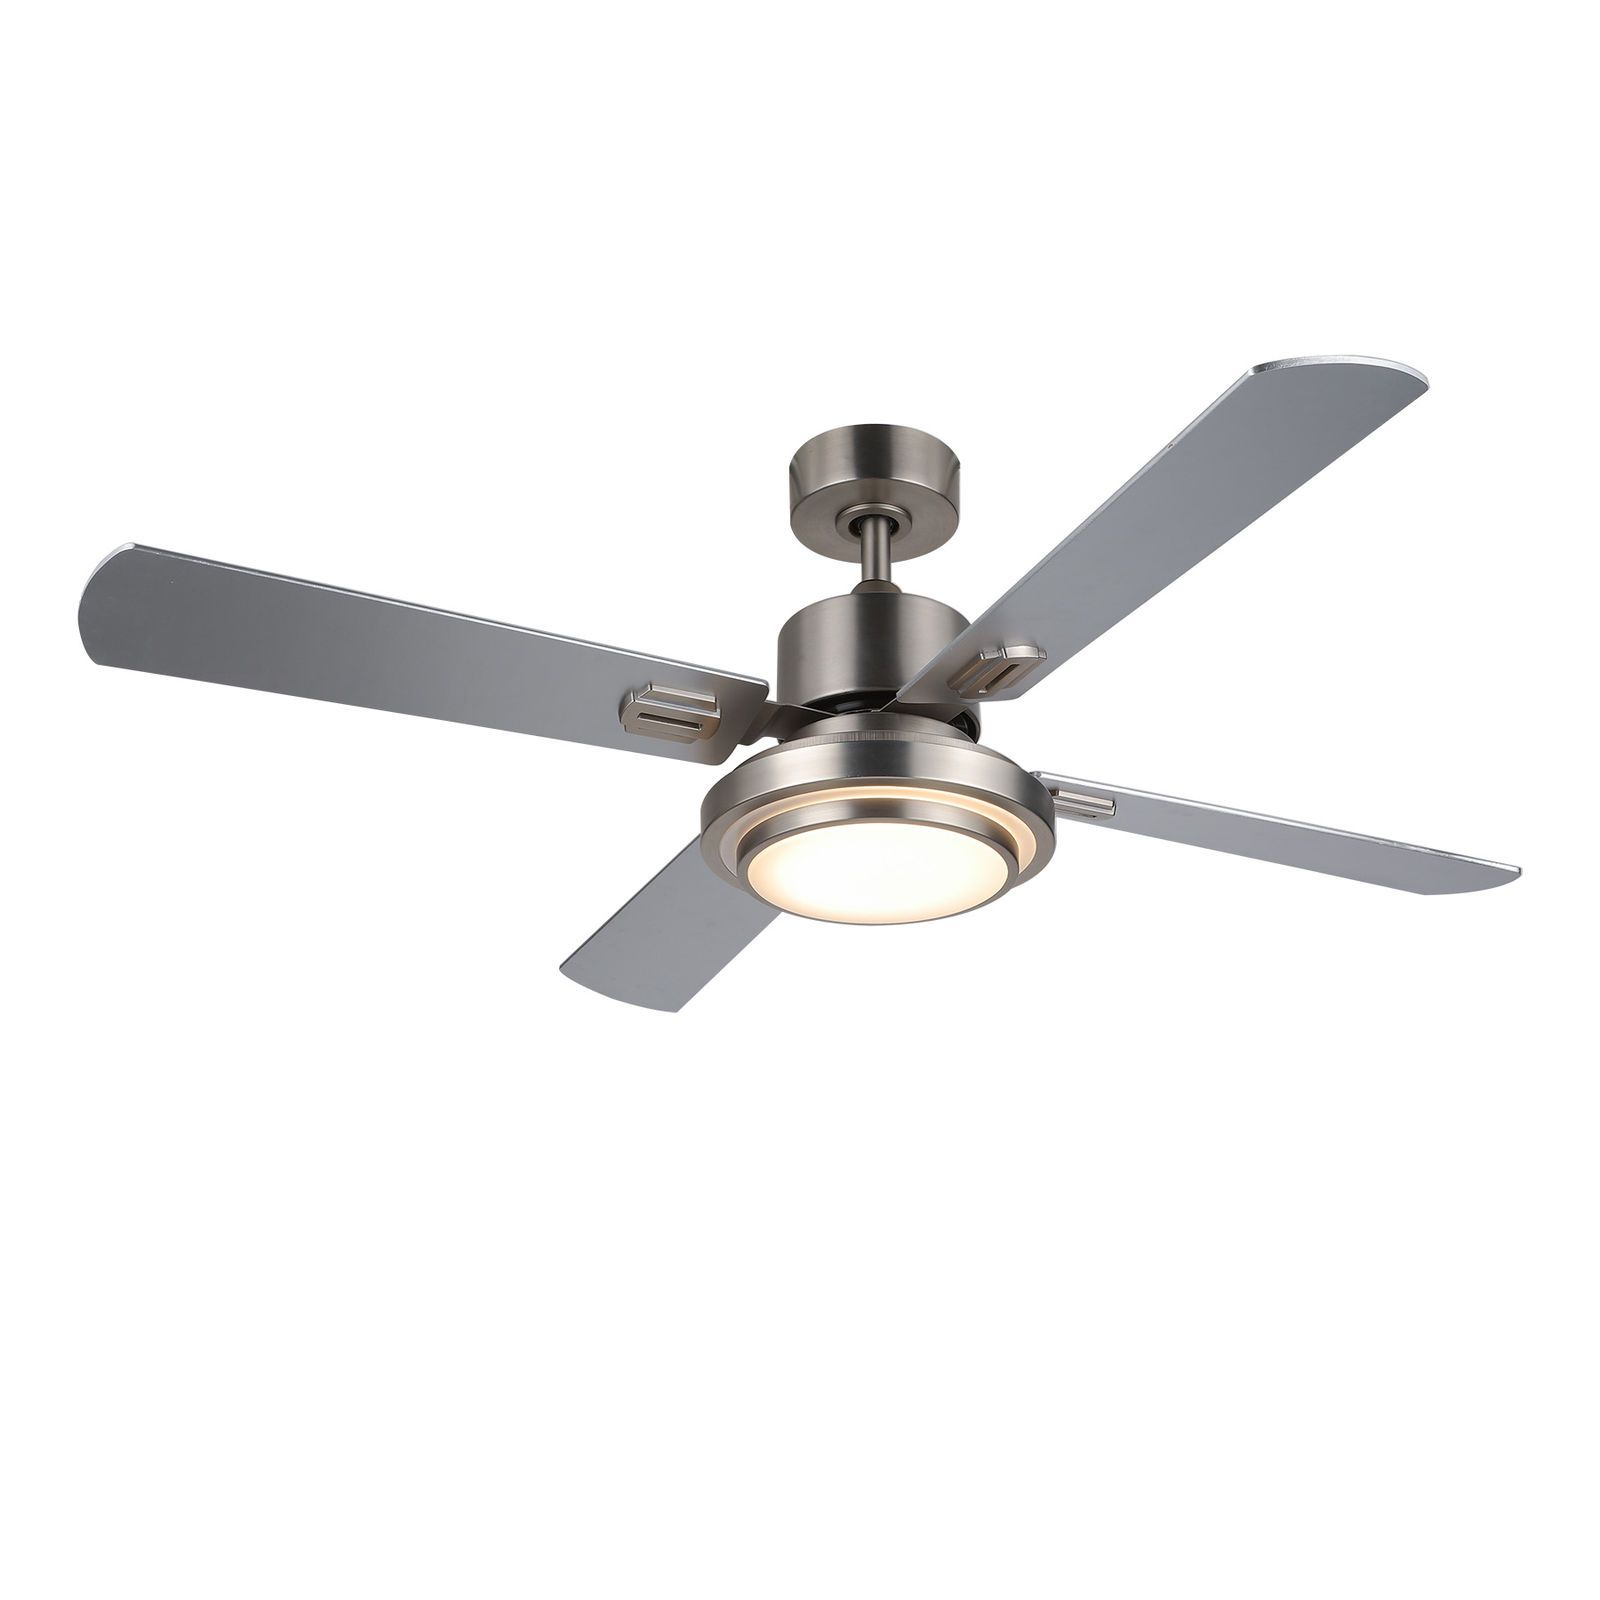 2019 Details About 52" 56'' Indoor Ceiling Fan Led Light Kit & Remote Control (View 20 of 20)